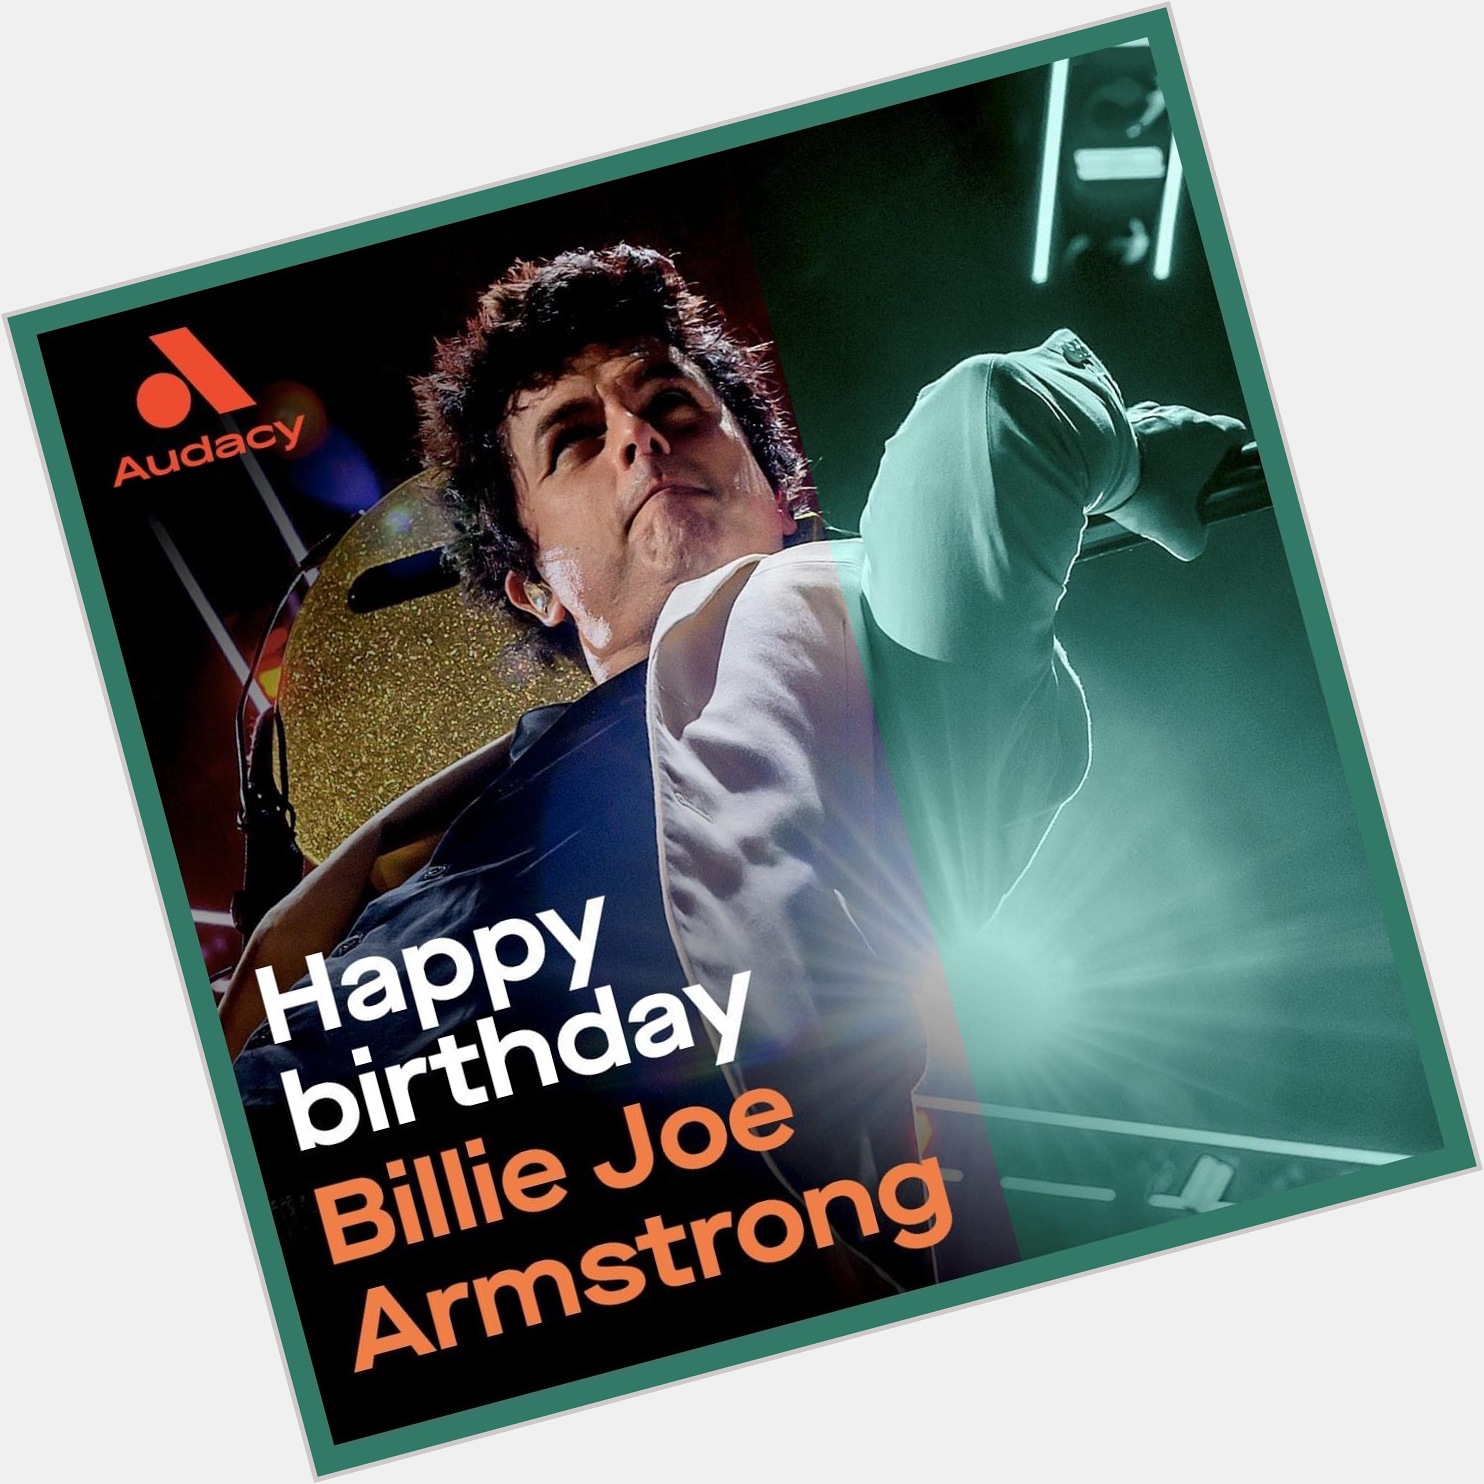 Born on this date in 1972, wishing a happy birthday to Billie Joe Armstrong 